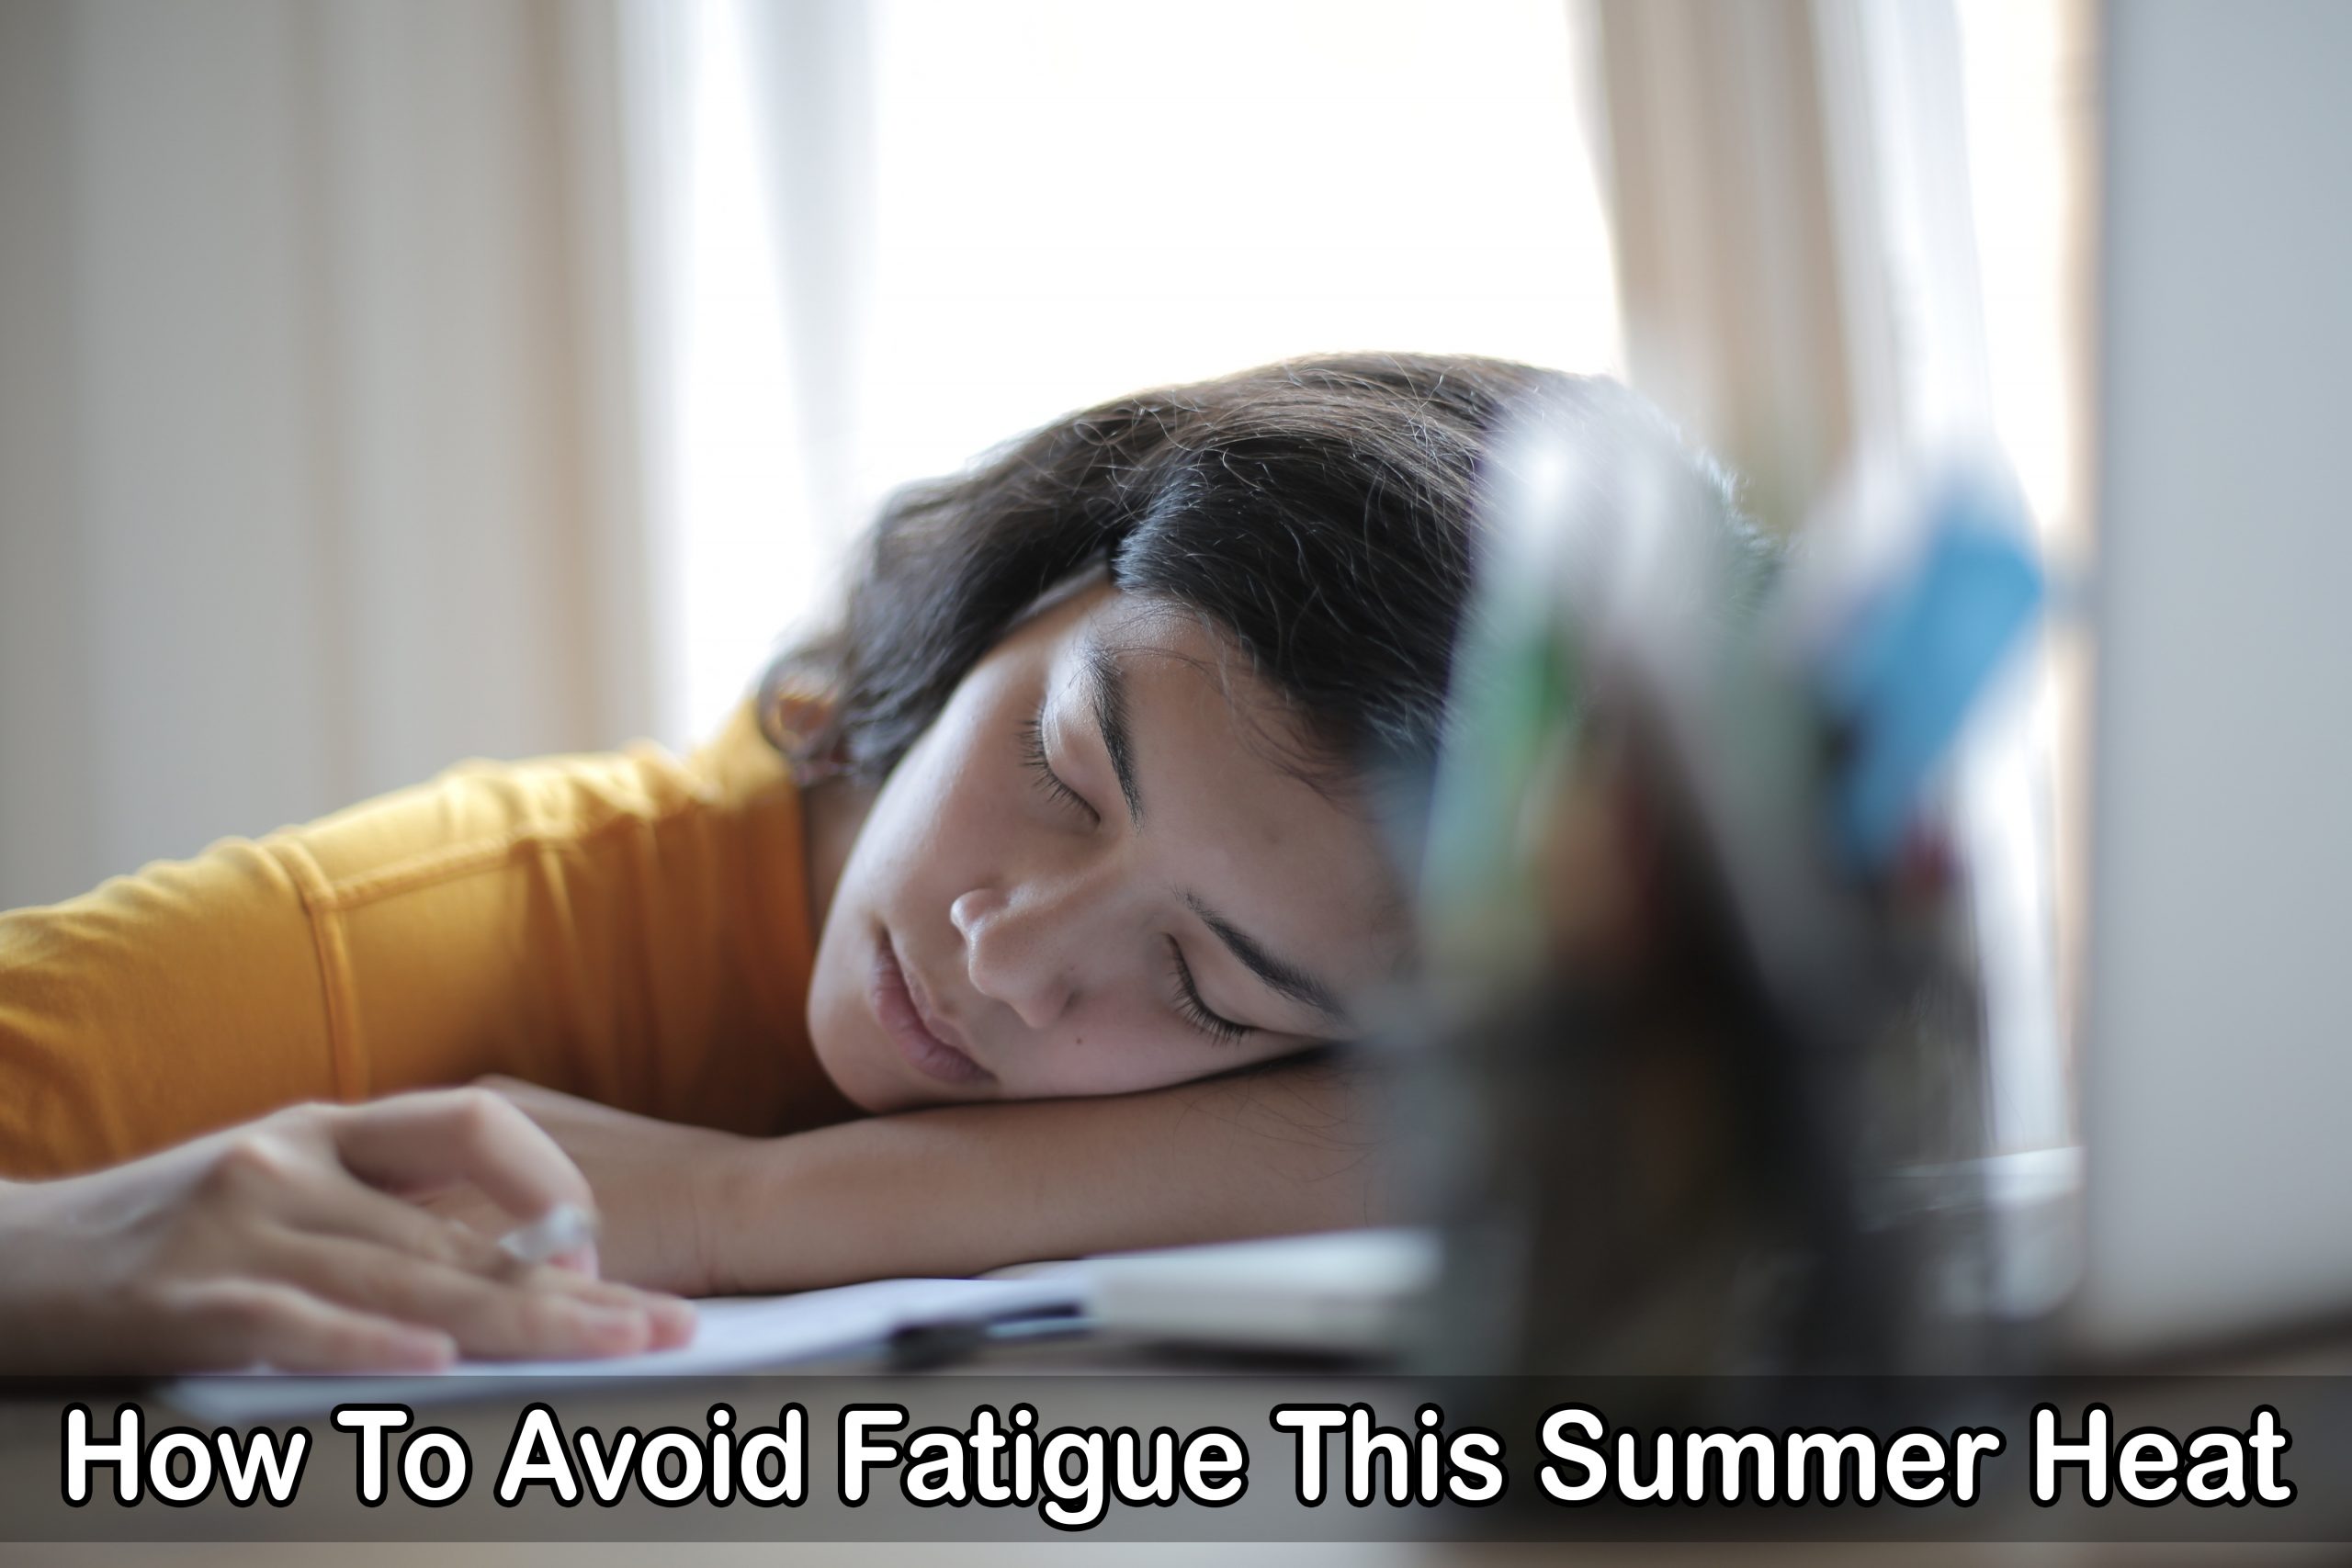 How To Avoid Fatigue This Summer Heat